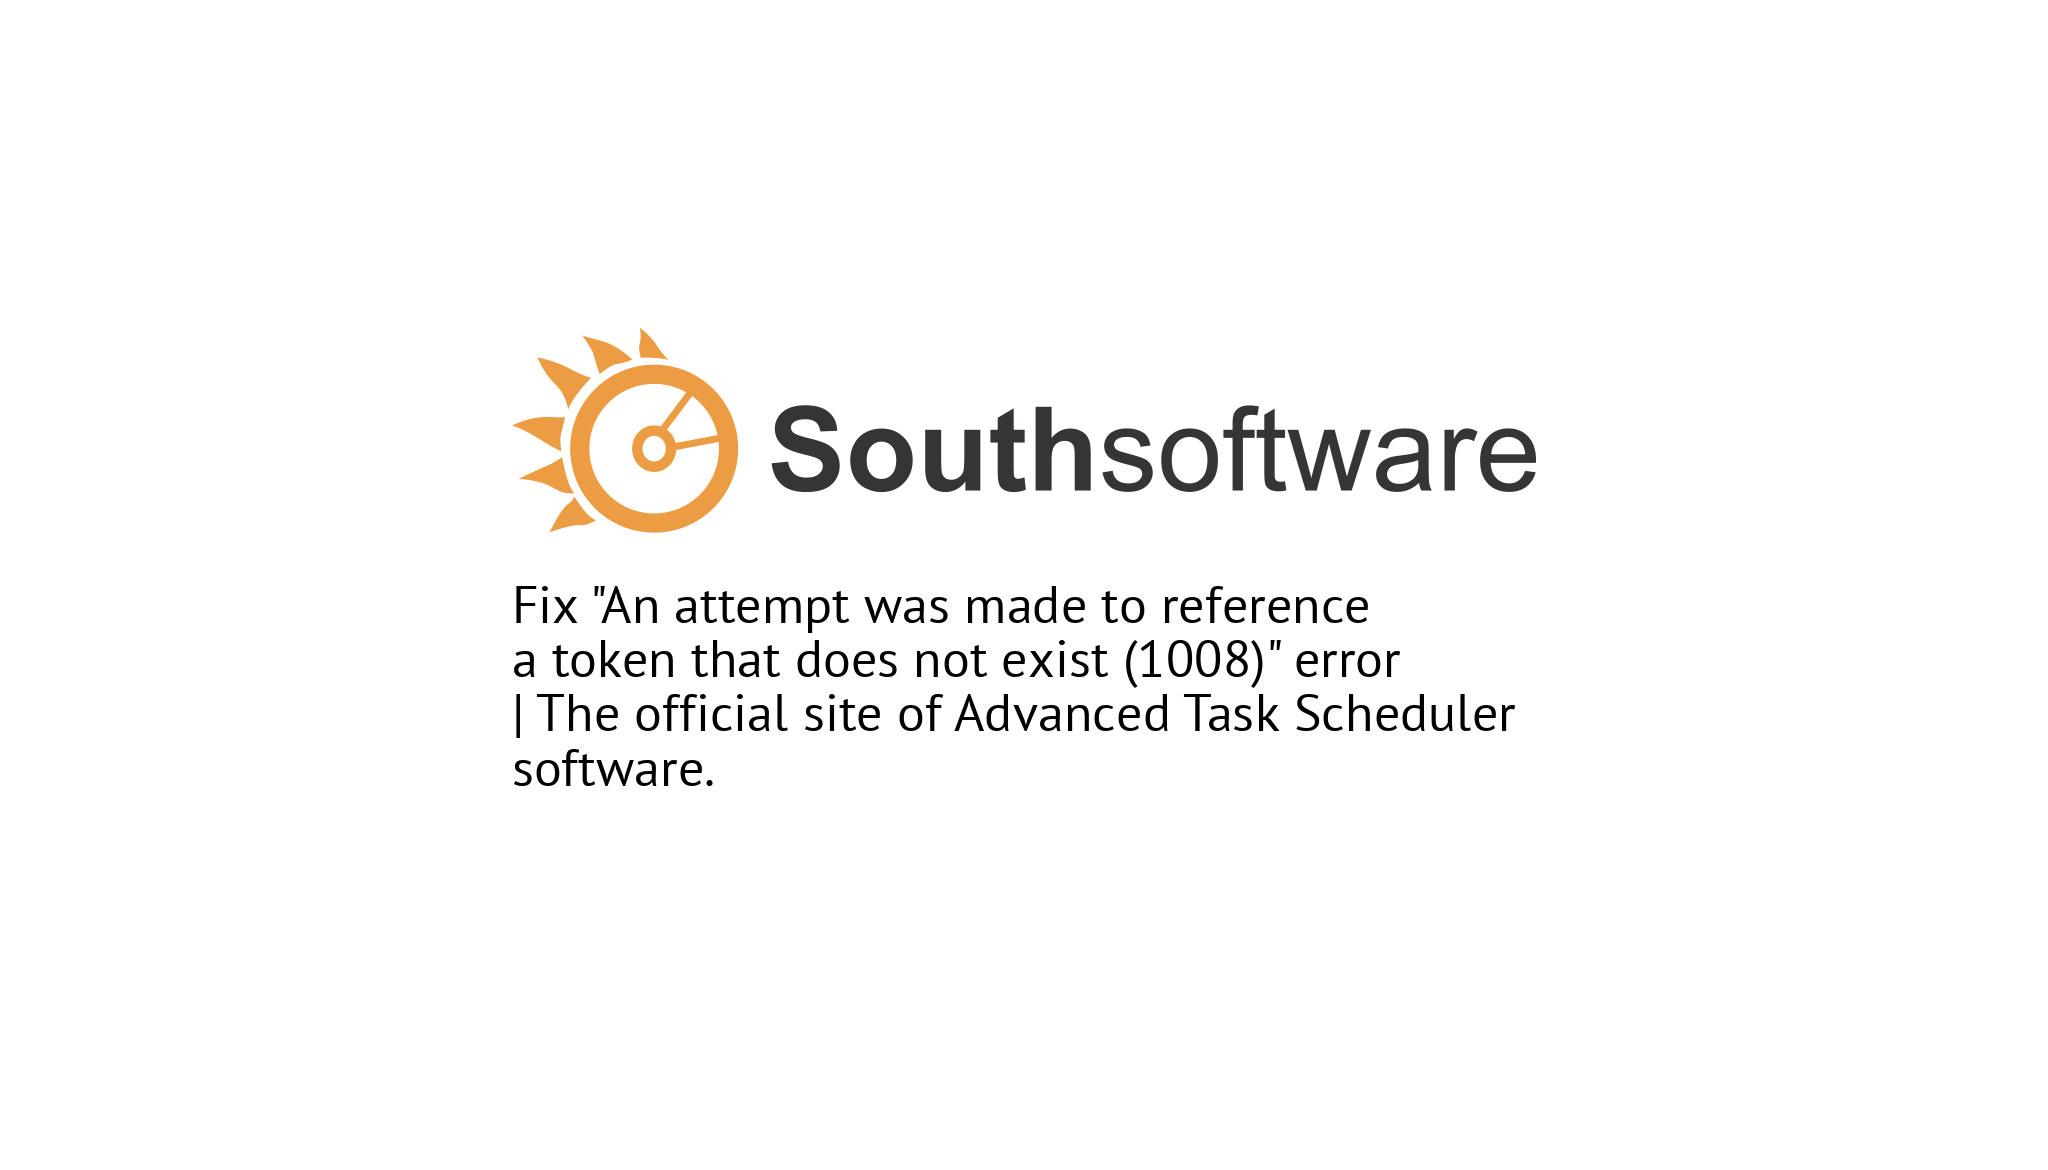 Fix An Attempt Was Made To Reference A Token That Does Not Exist 1008 Error The Official Site Of Advanced Task Scheduler Software